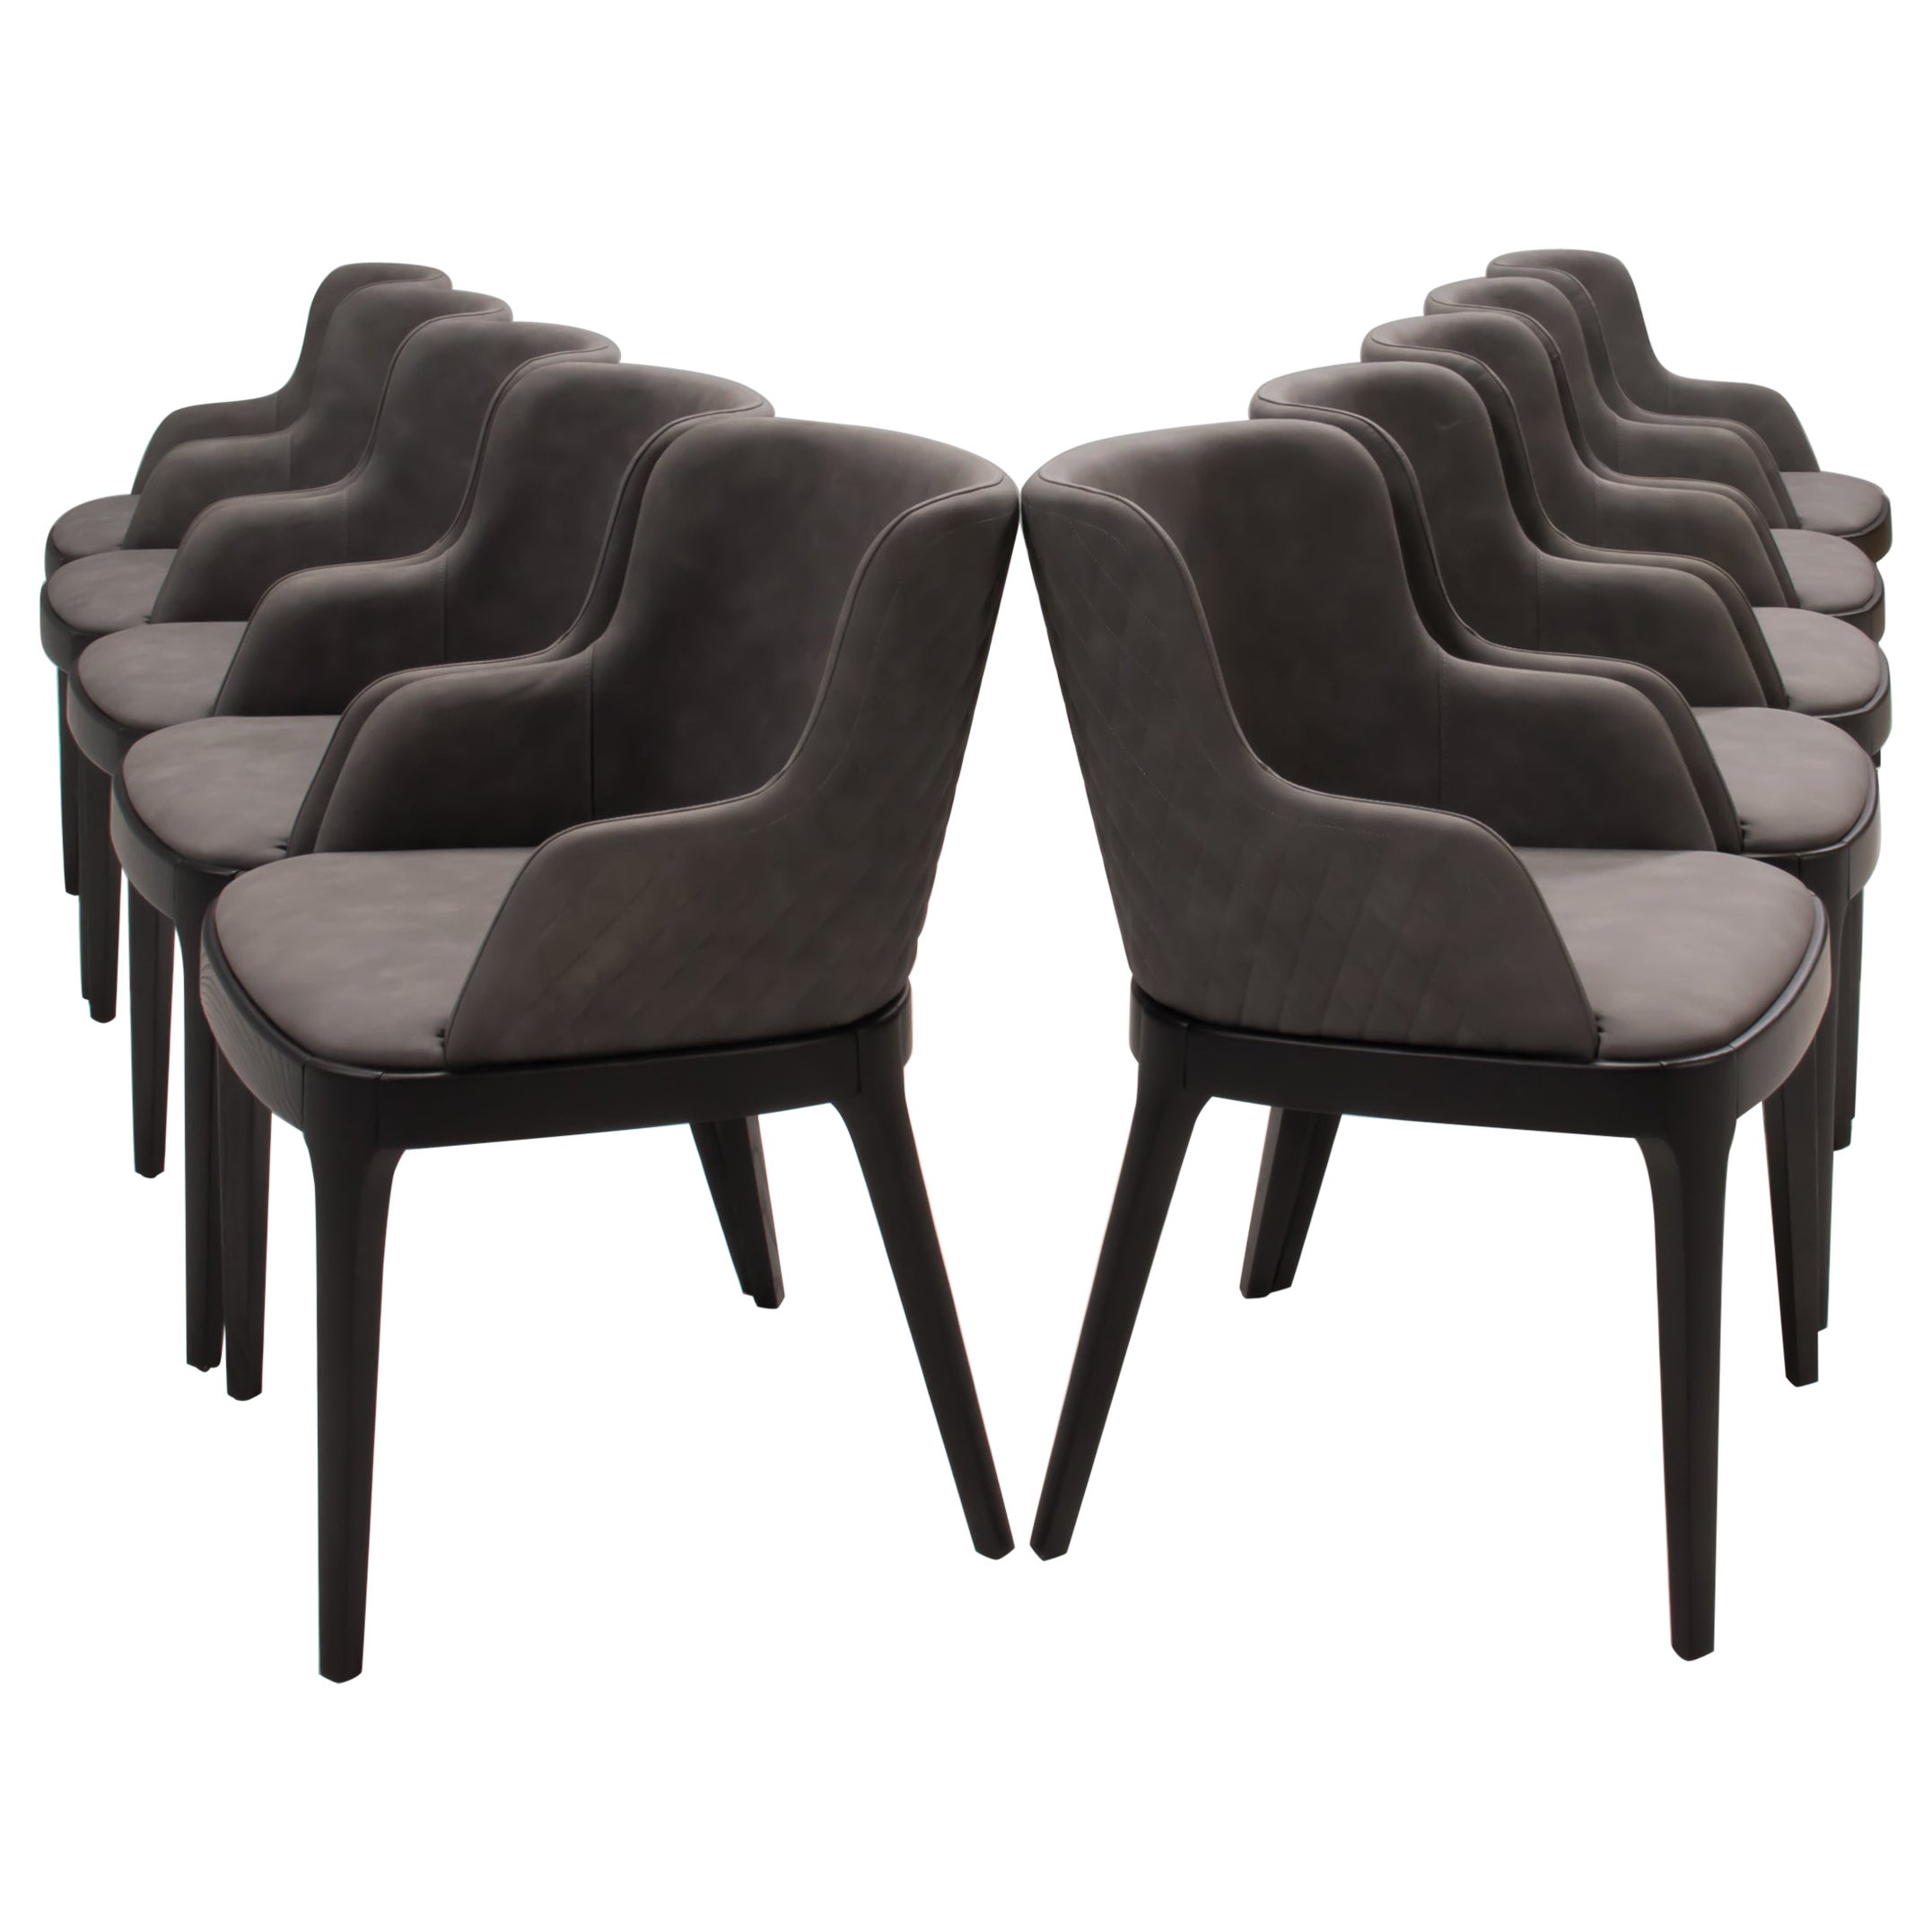 Cattelan Italia Magda Couture Grey Leather Dining Chairs, Set of 10